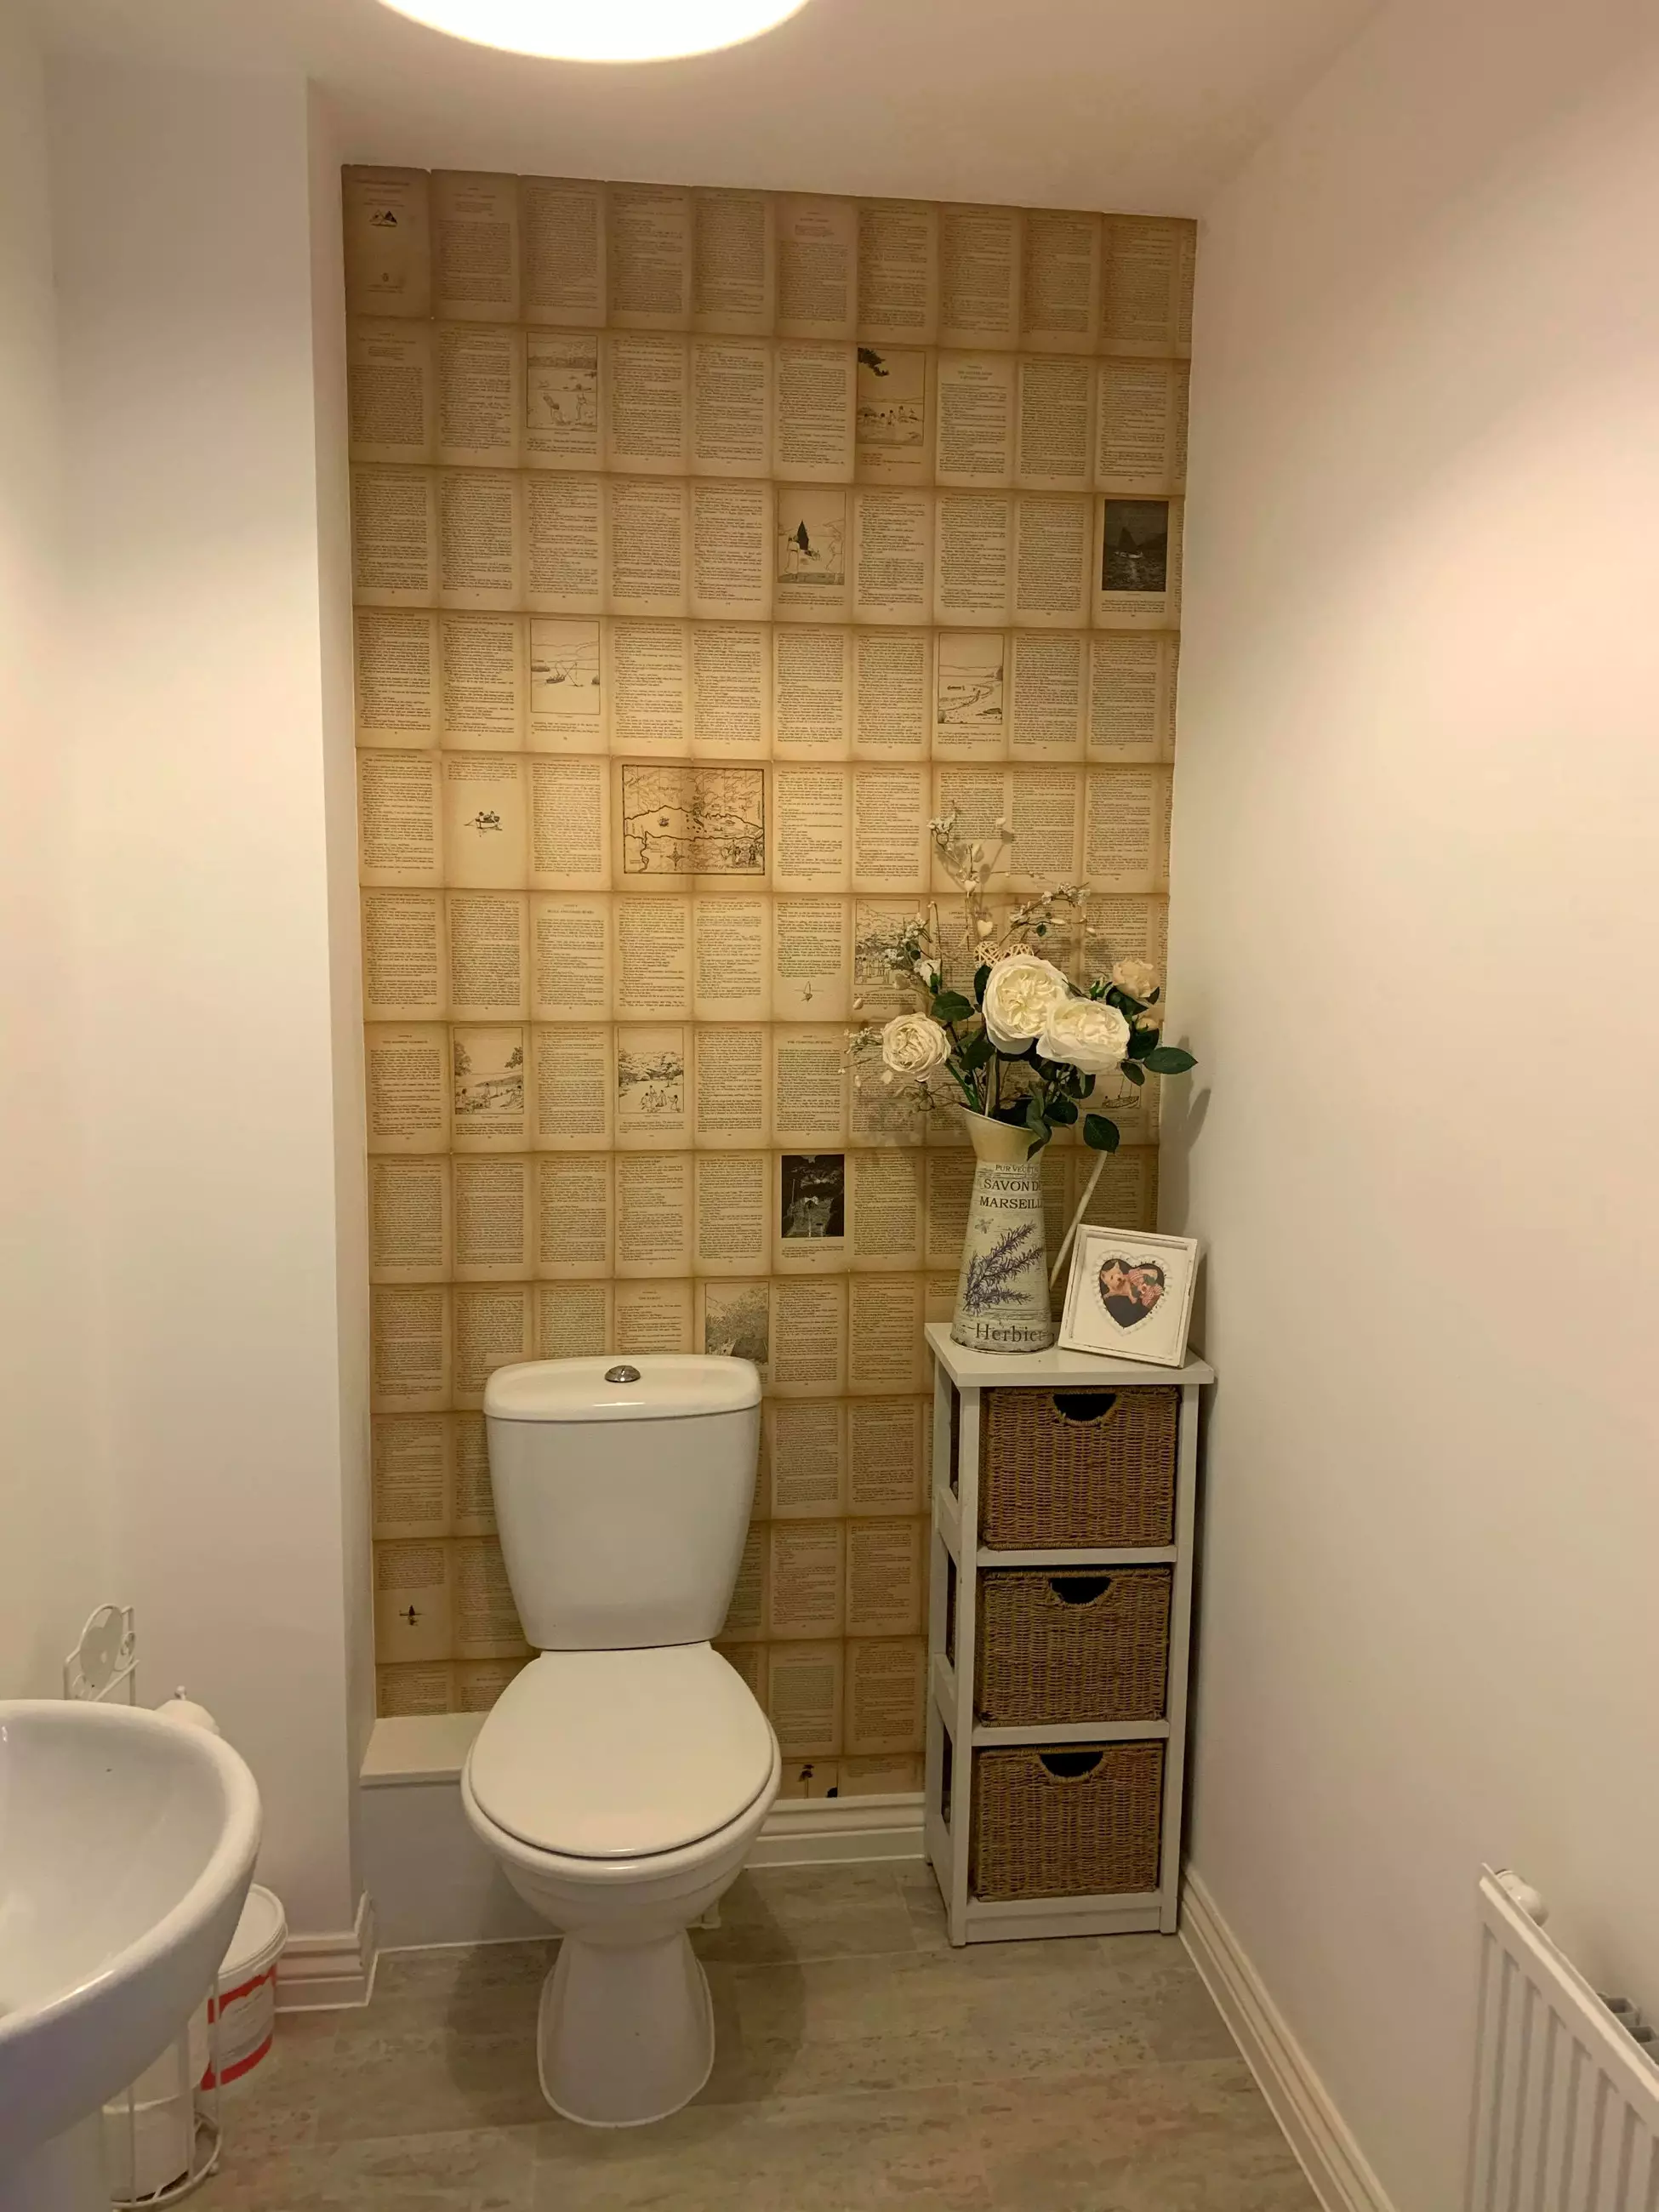 The book 'Swallows and Amazons' can be seen on the downstairs bathroom walls (